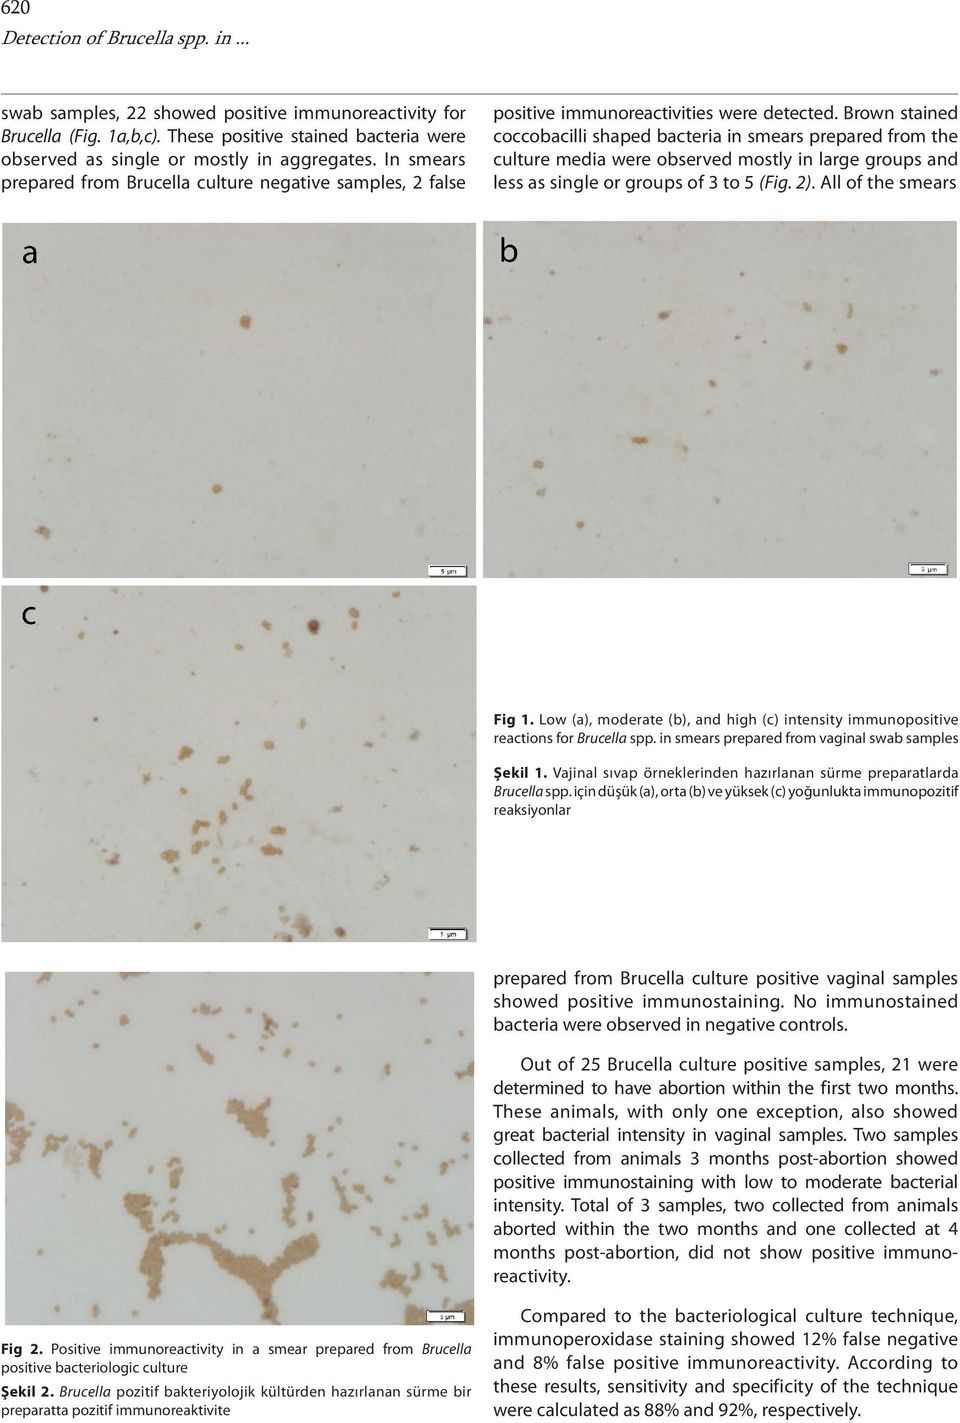 Brown stained coccobacilli shaped bacteria in smears prepared from the culture media were observed mostly in large groups and less as single or groups of 3 to 5 (Fig. 2). All of the smears Fig 1.